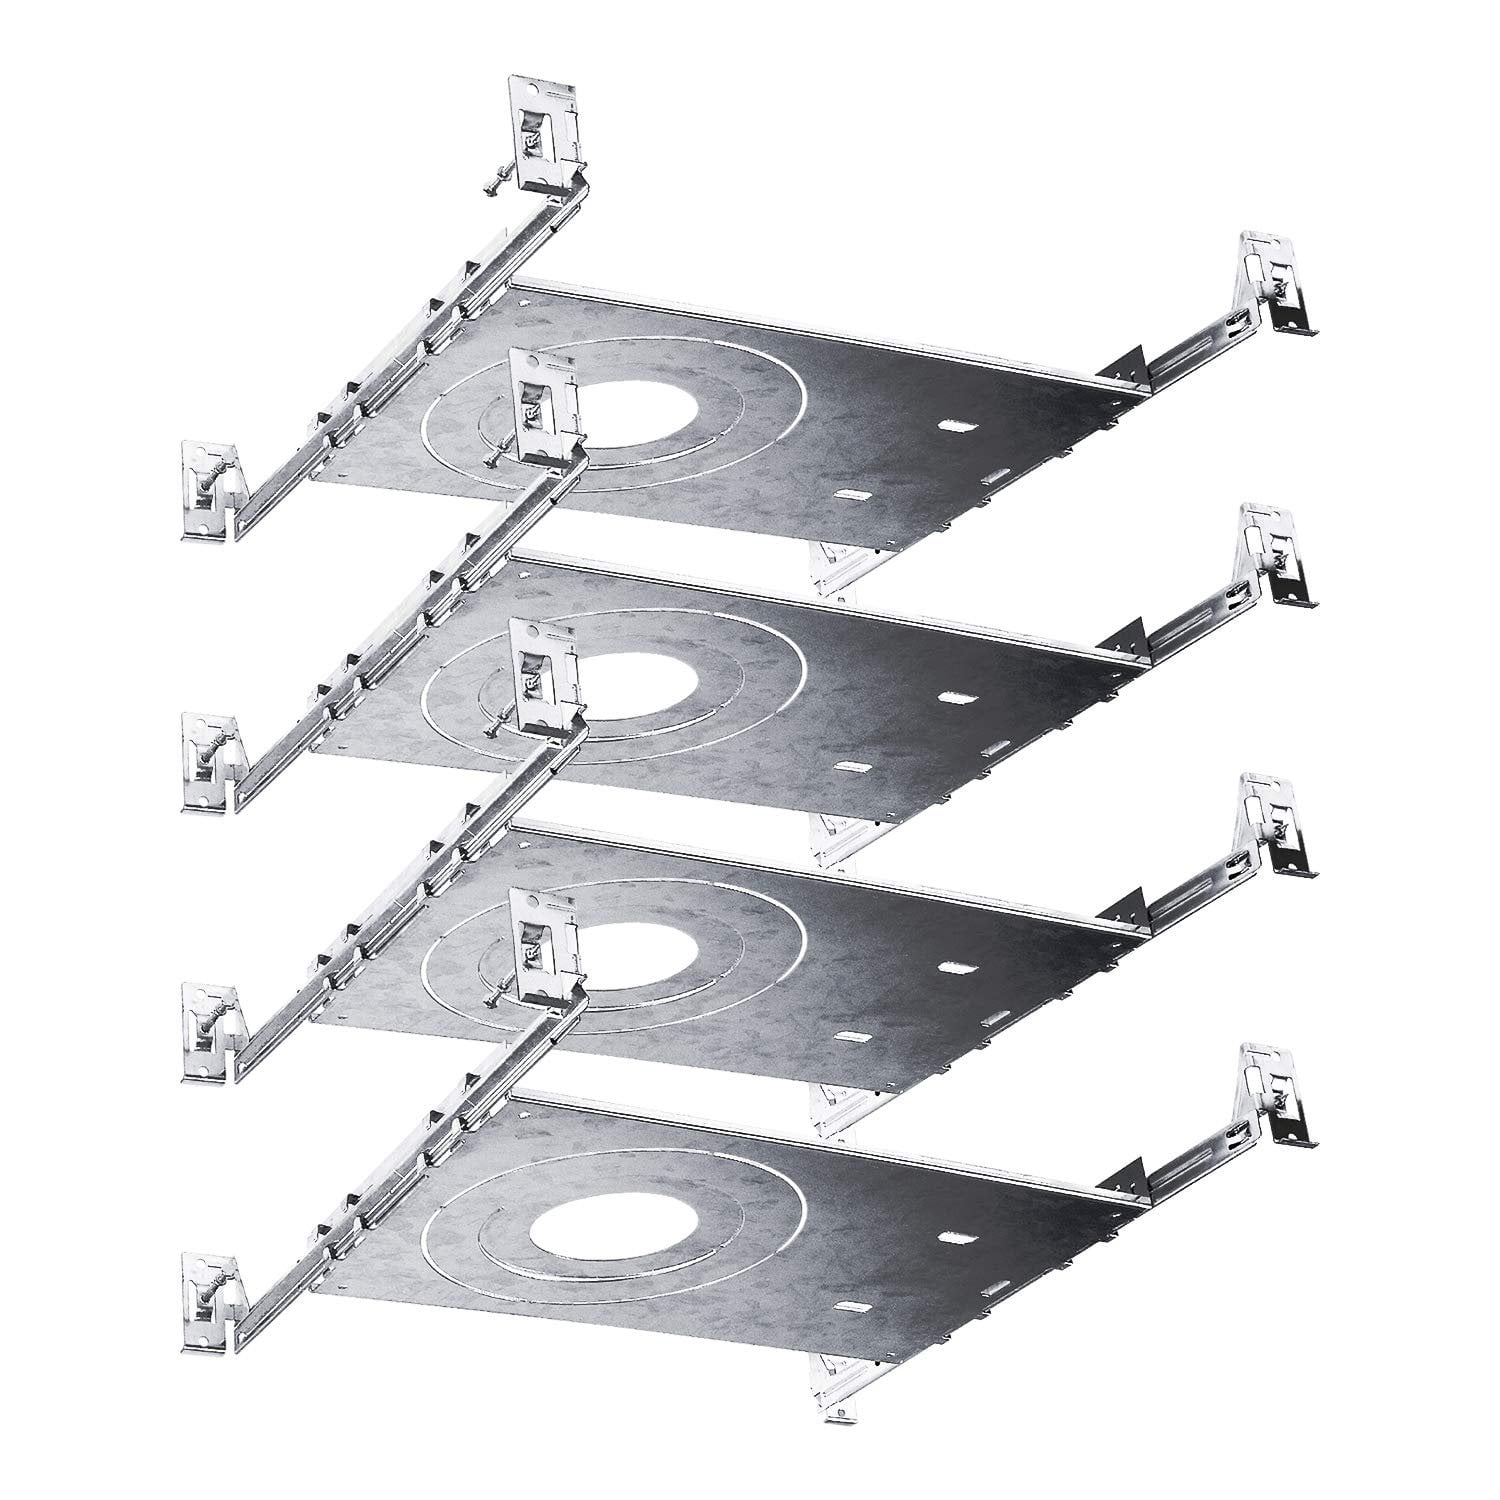 Led Recessed Lighting Kits, 3 Inch Recessed Lighting Led